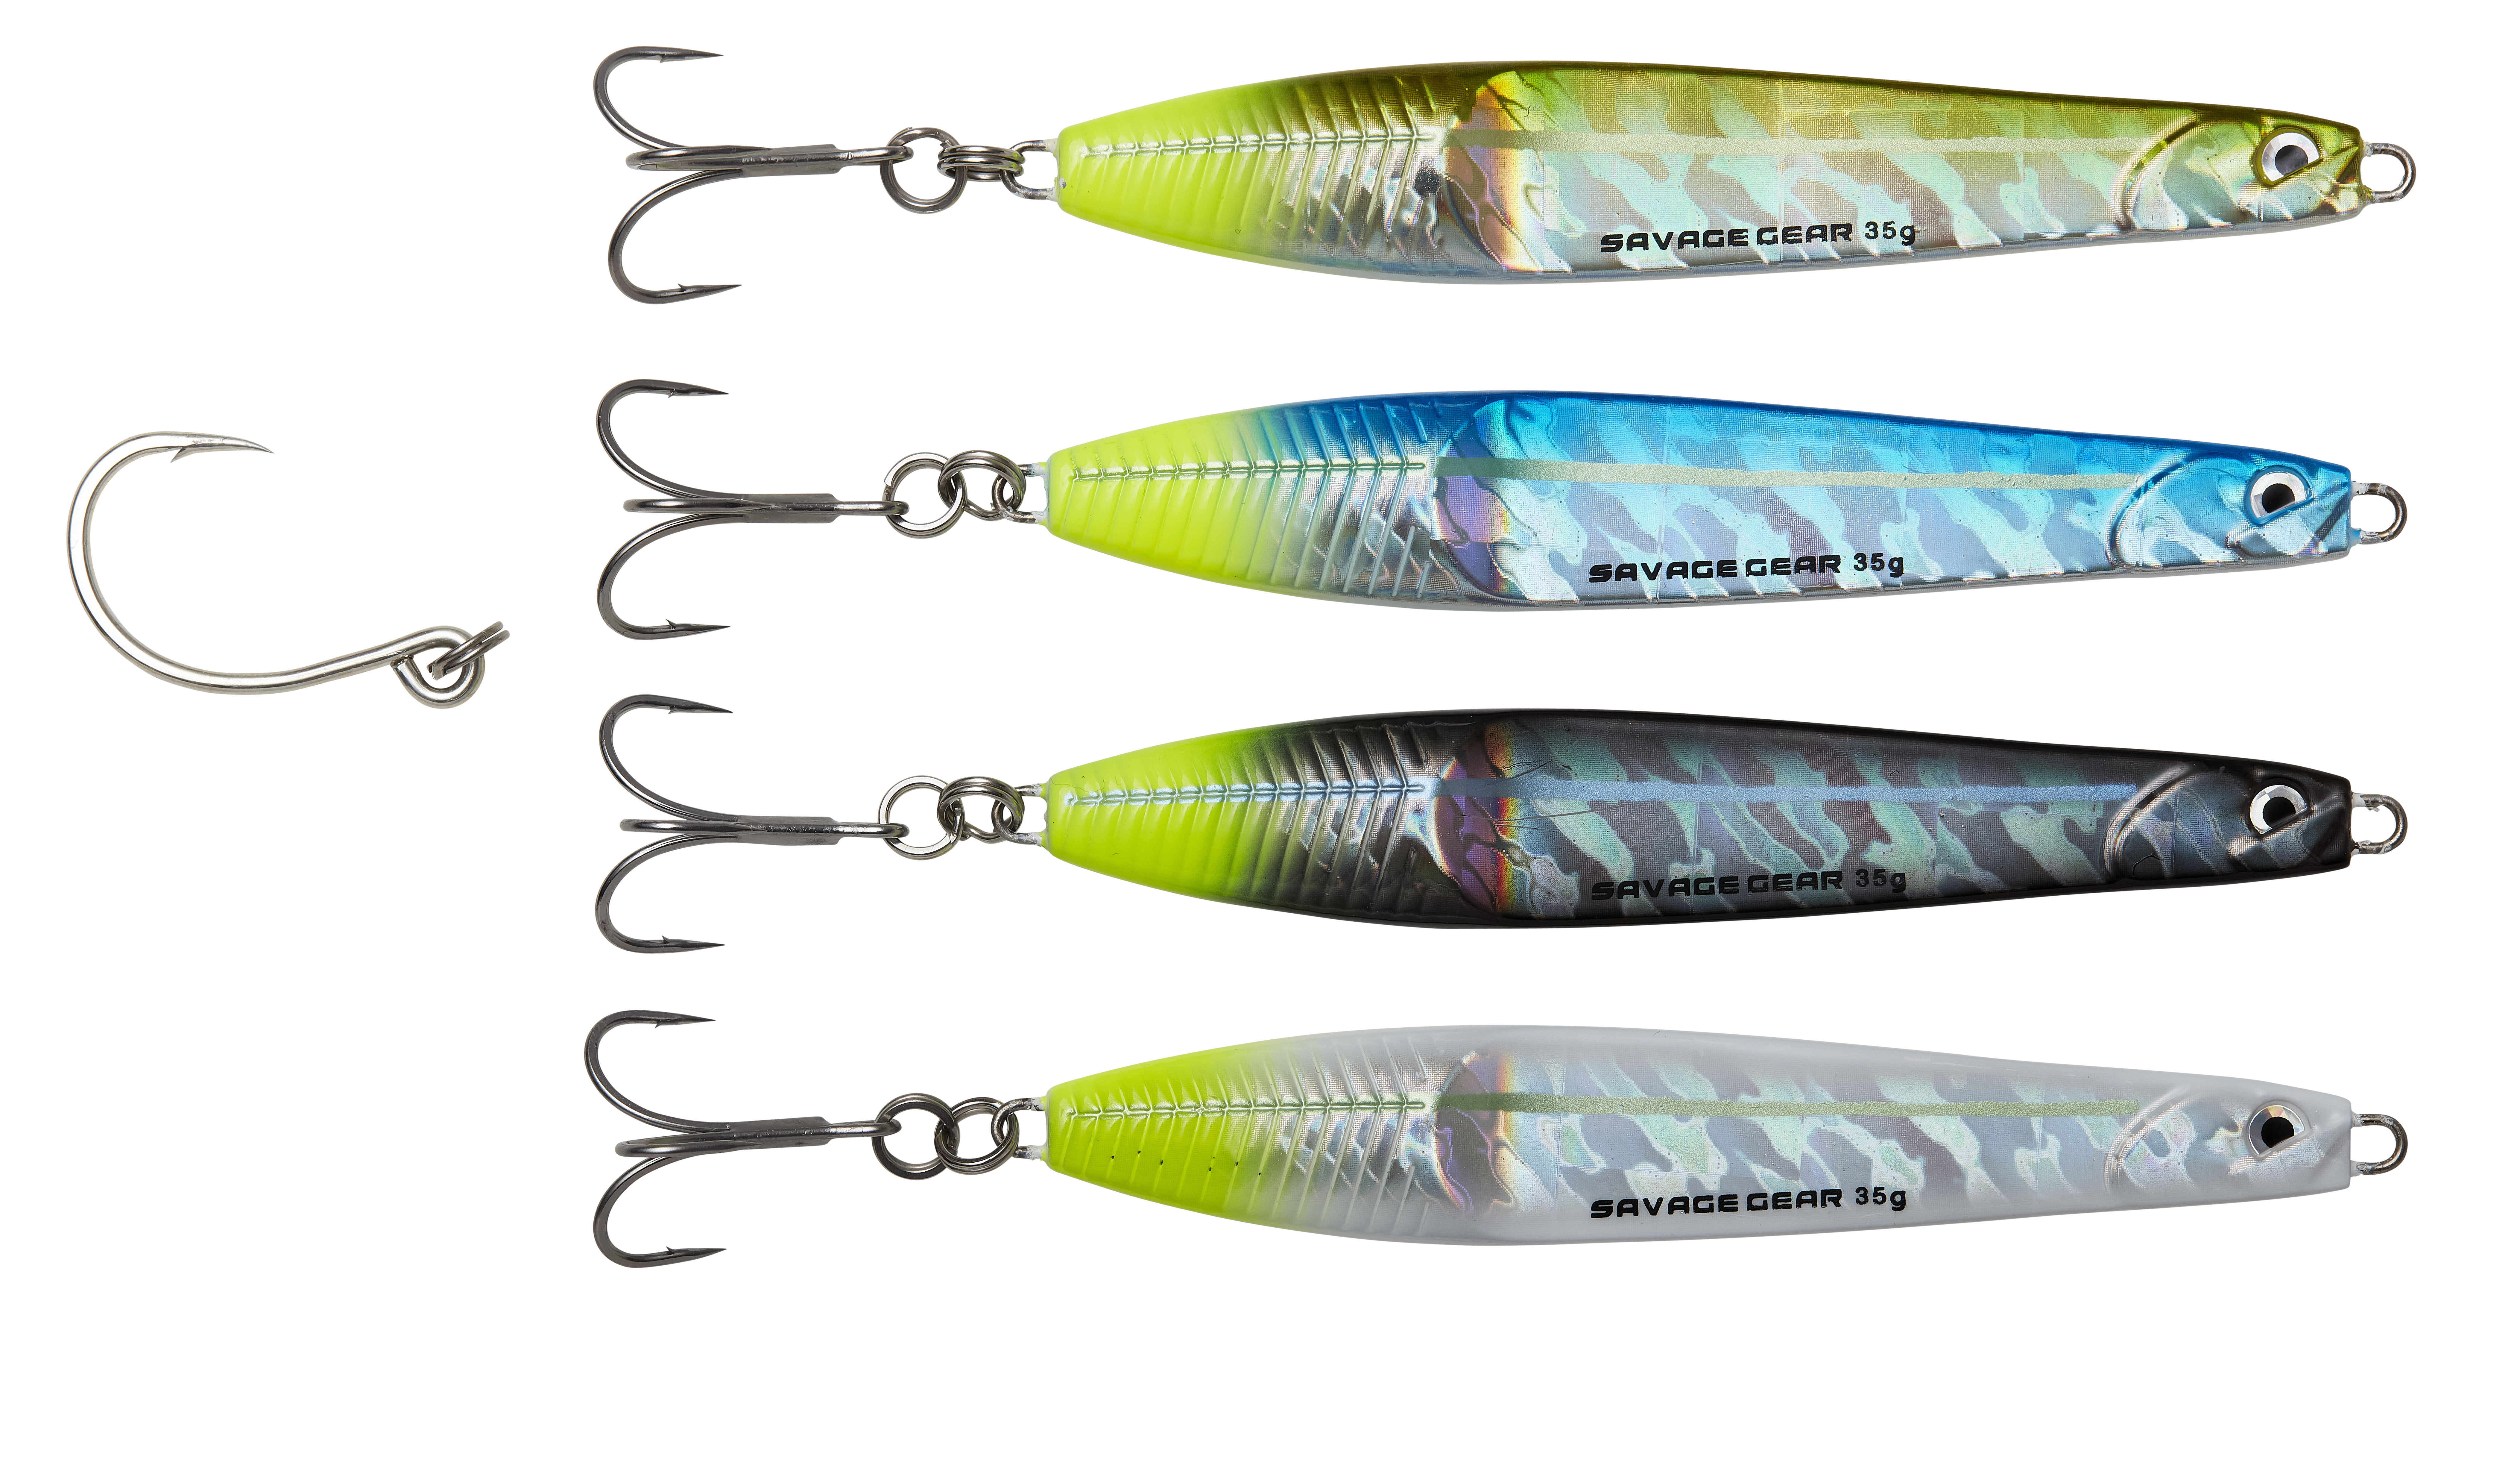 NOMURA Umi Jig Lure and Colours